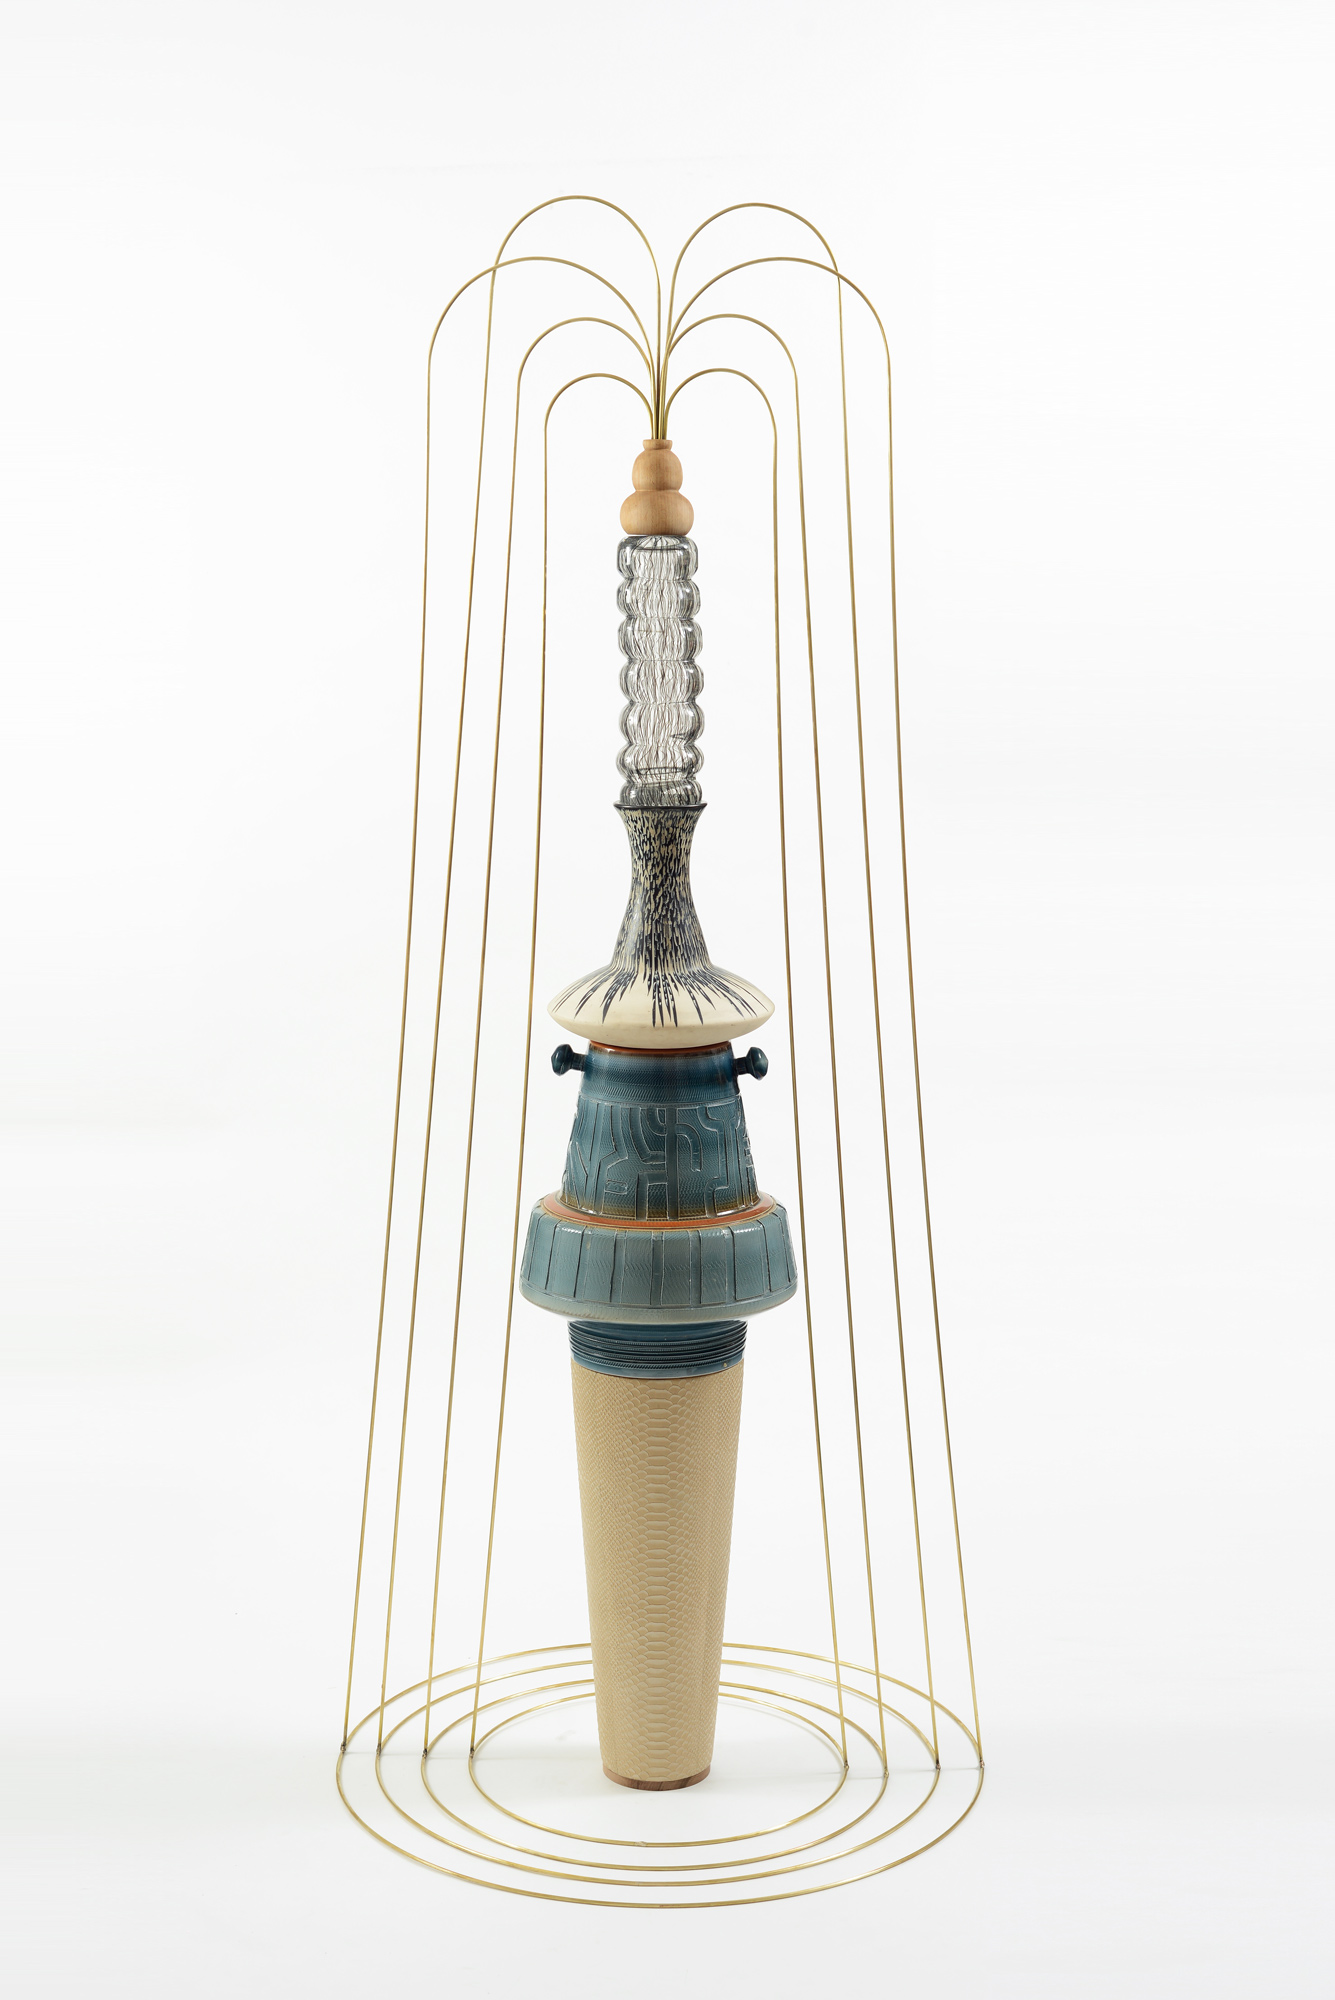 Liora Kaplan, Simply Because it Changes, 2019, mixed media, wood cone covered with faux snake leather, Kfar Menachem vase, Harsa Vase, glass, carved wood and brass pipes